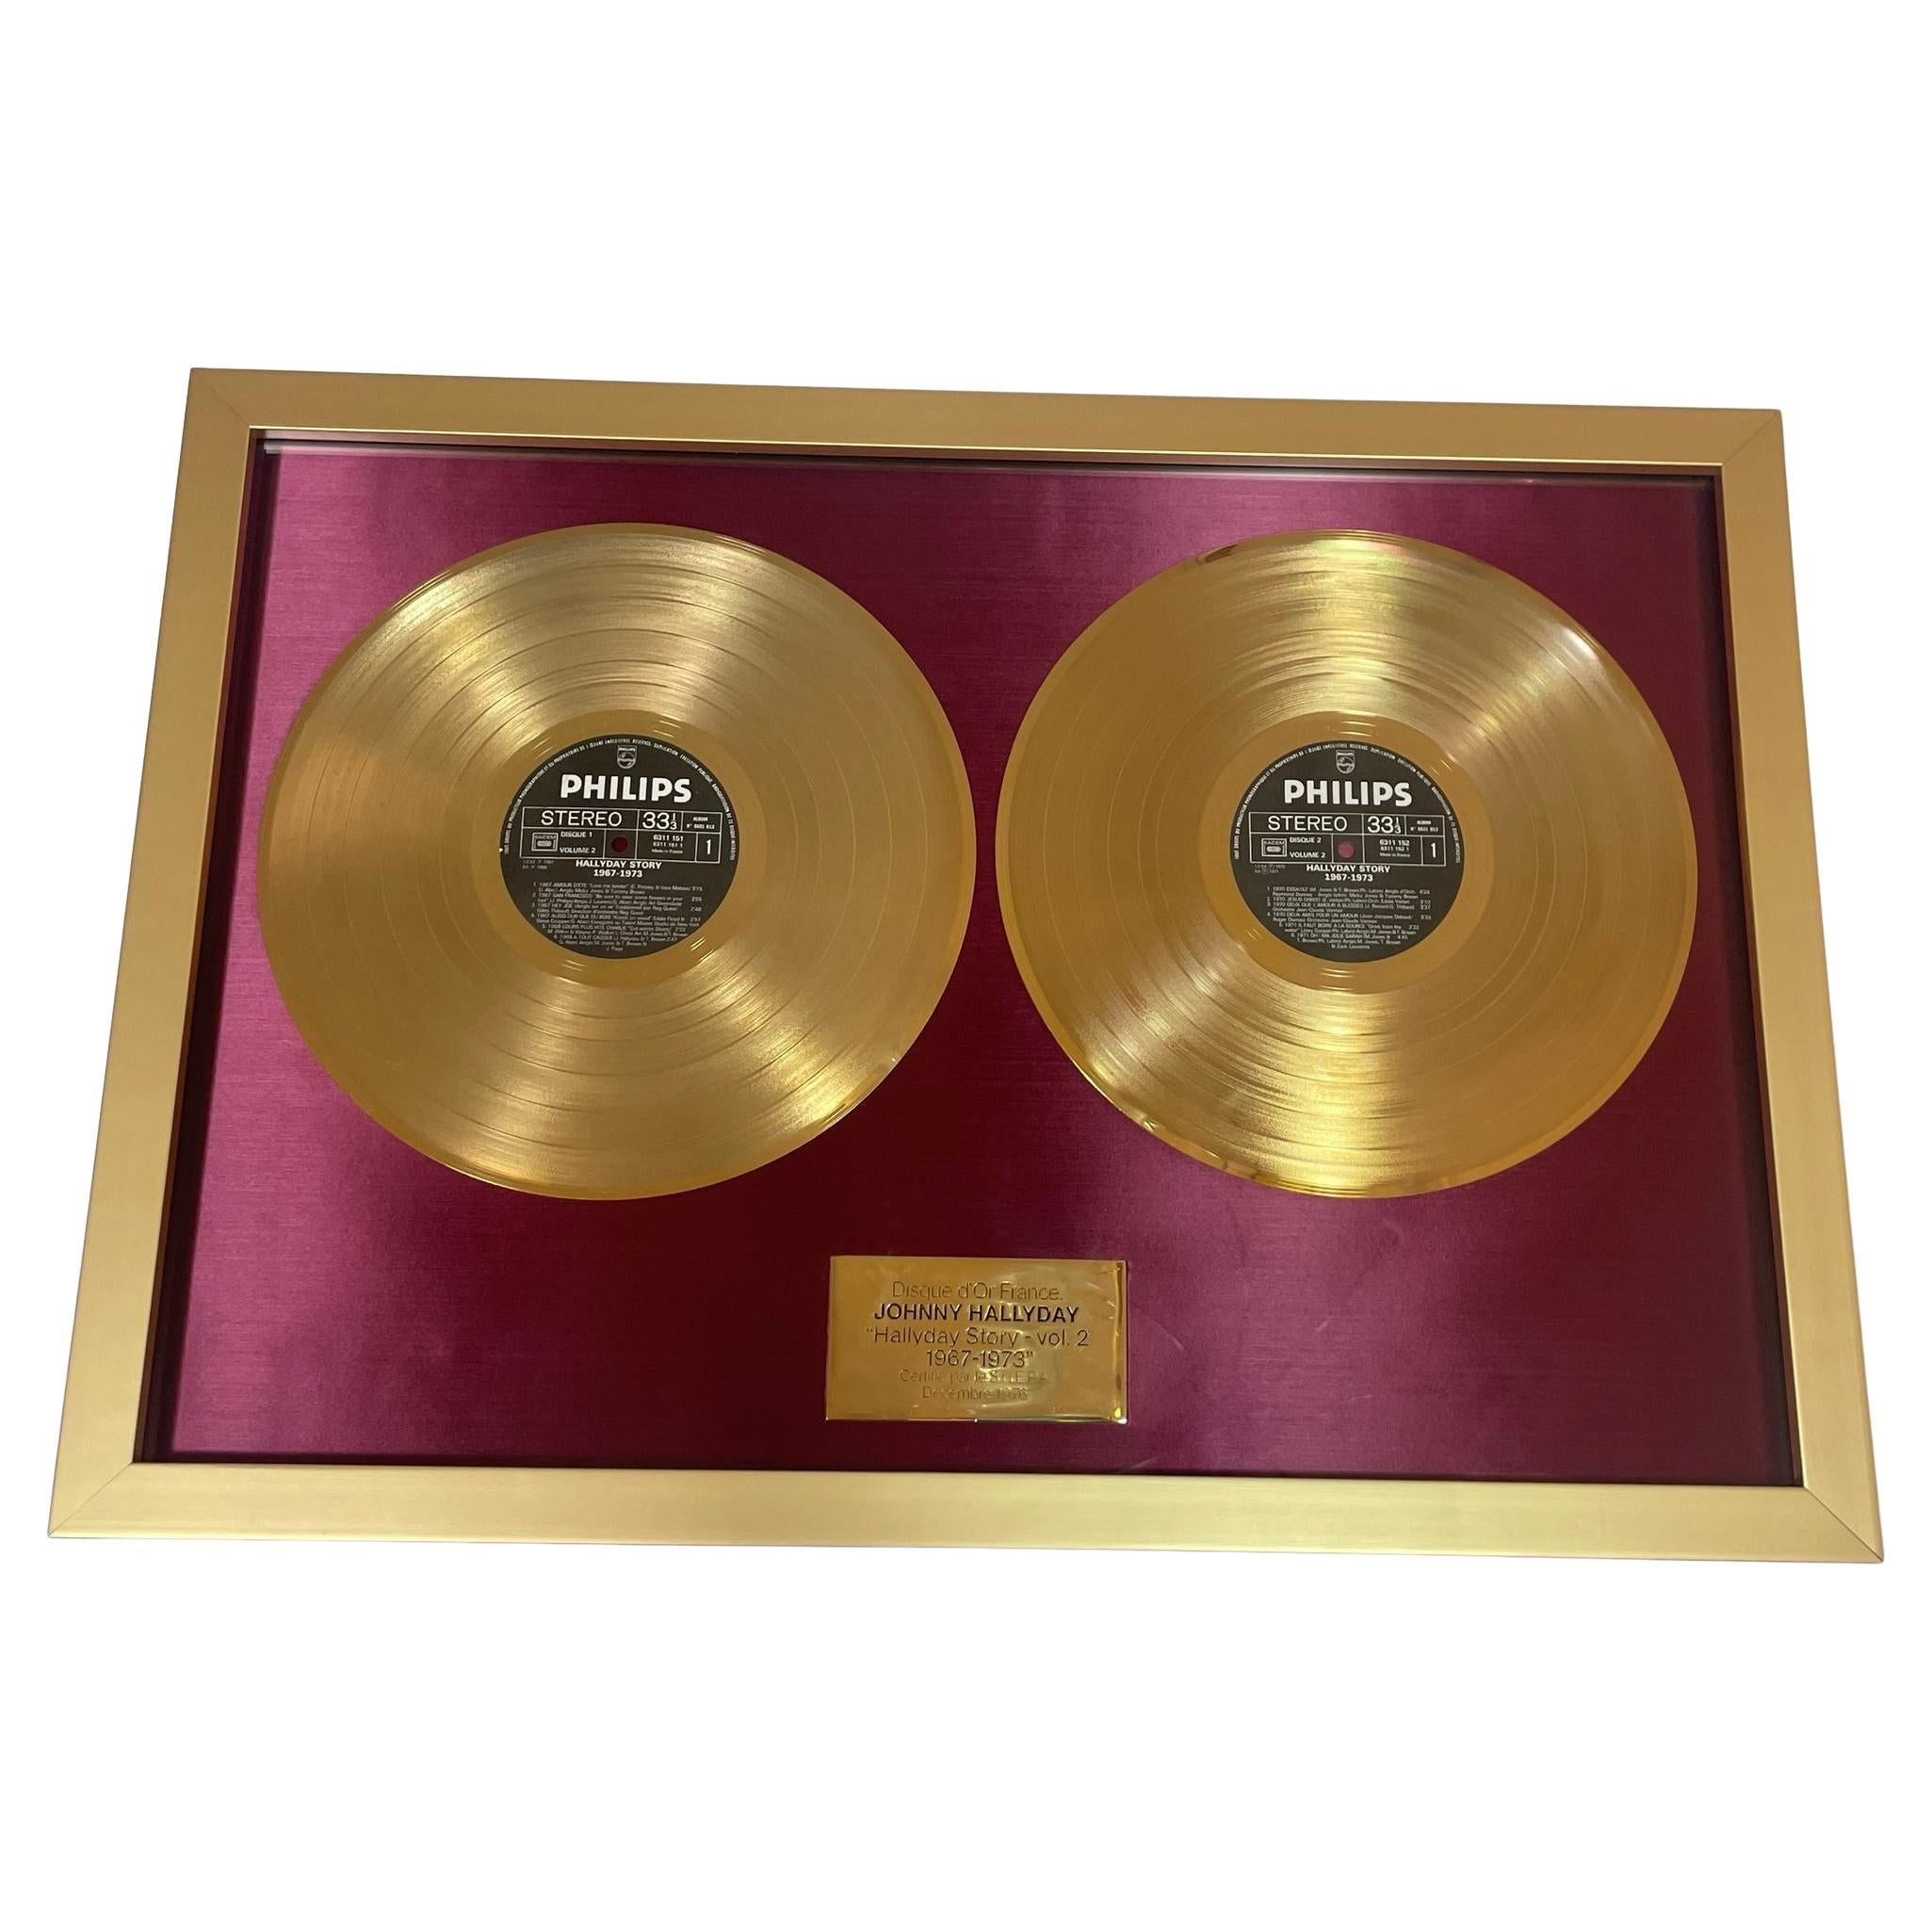 Official Gold Record Award France Johnny Halliday Story 1967-1973 Vol.2